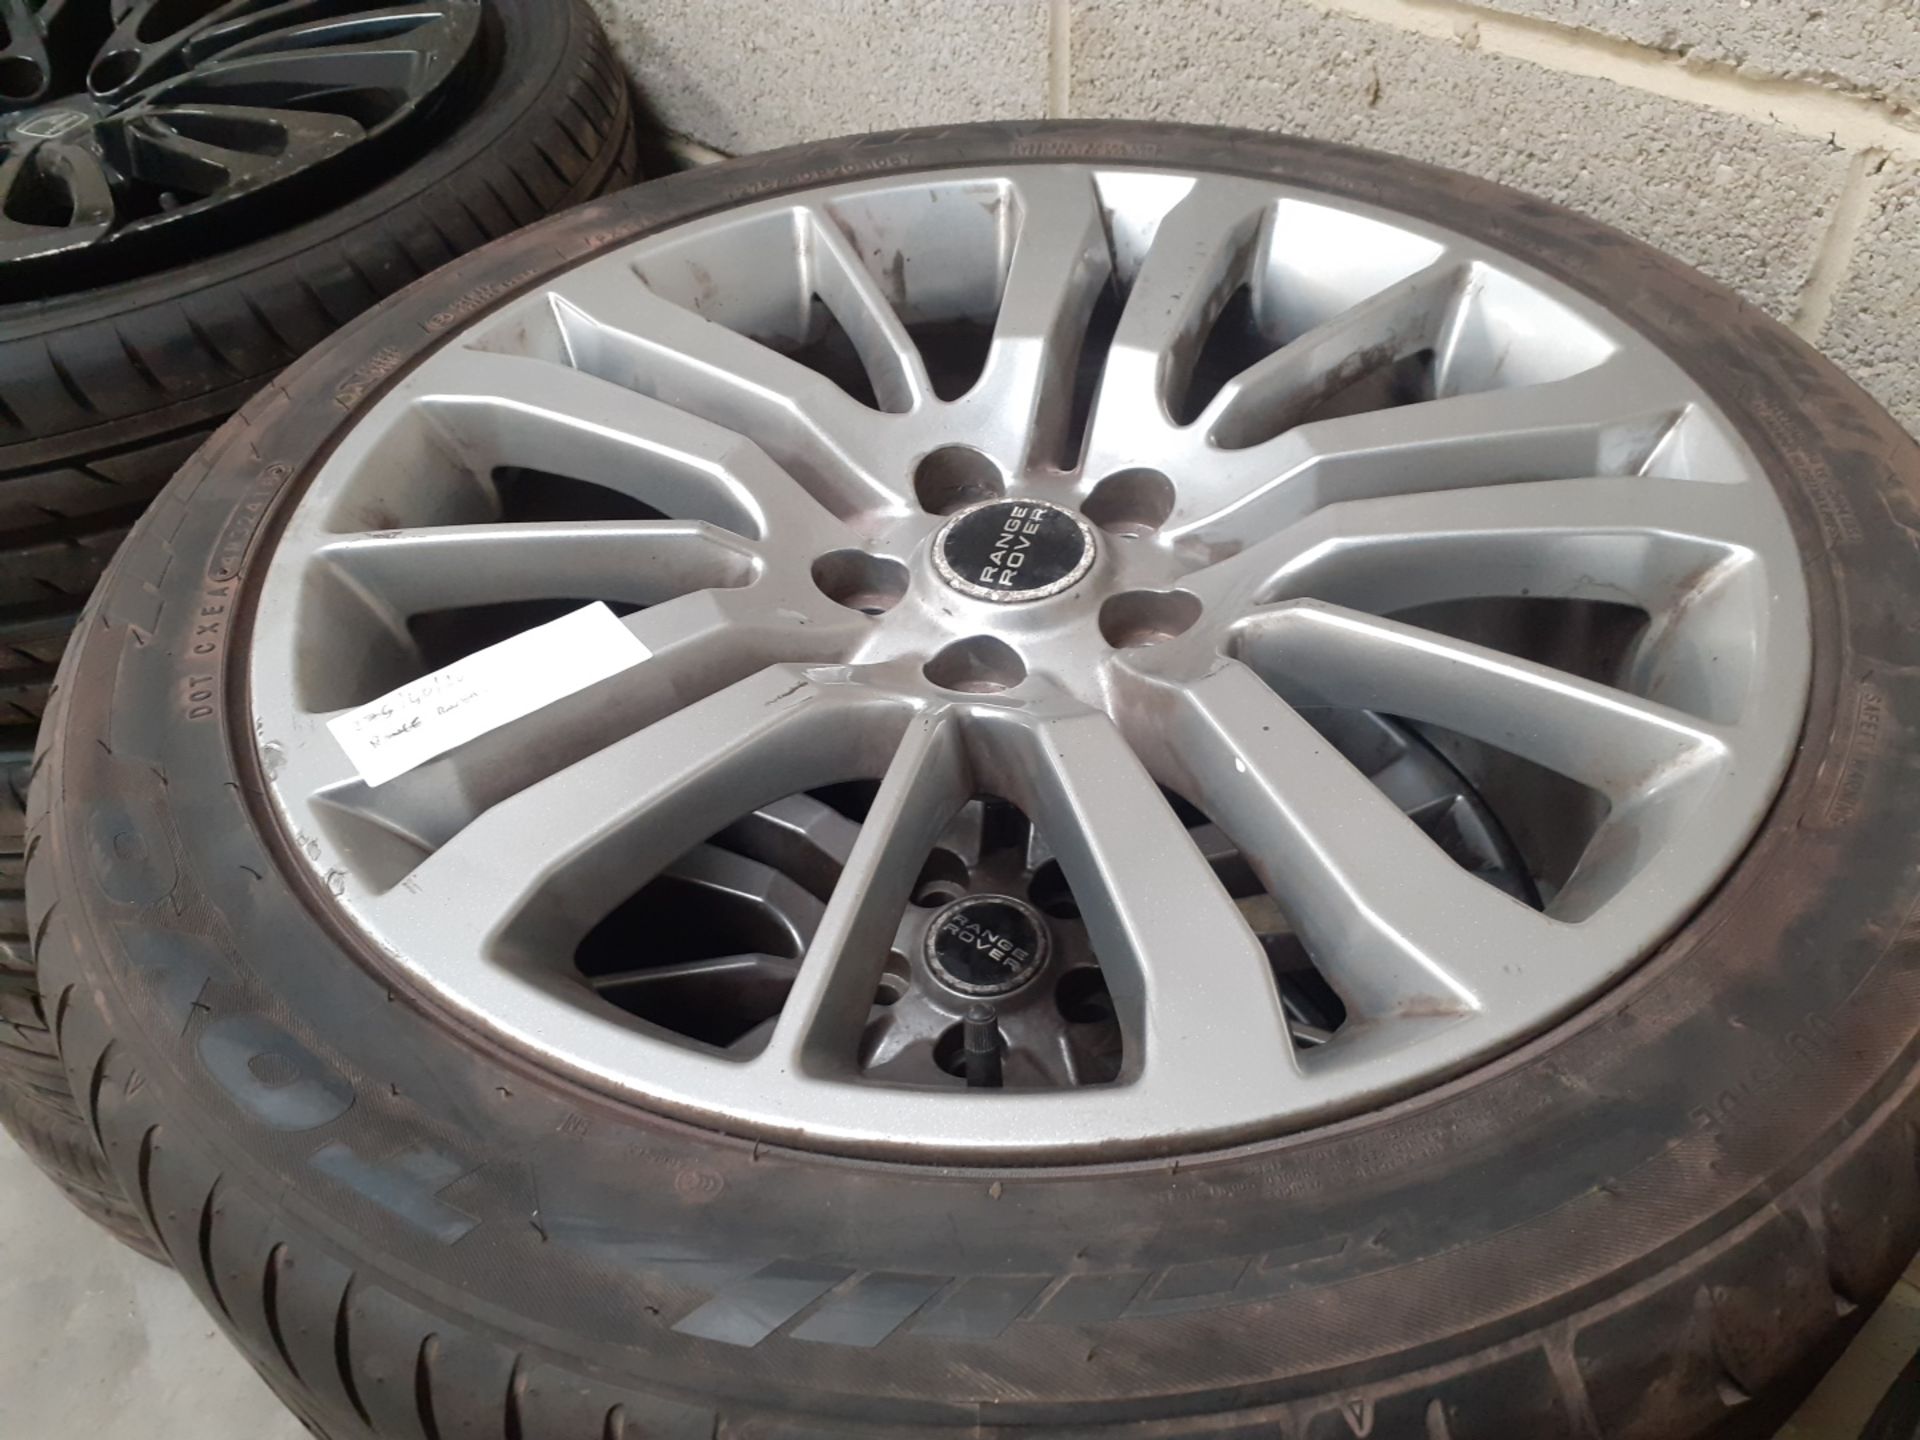 JOB LOT OF 30 SETS OF ALLOY WHEELS WITH TYRES, LAND ROVER RANGE ROVER, OVER £31K RRP *NO VAT* - Image 13 of 17